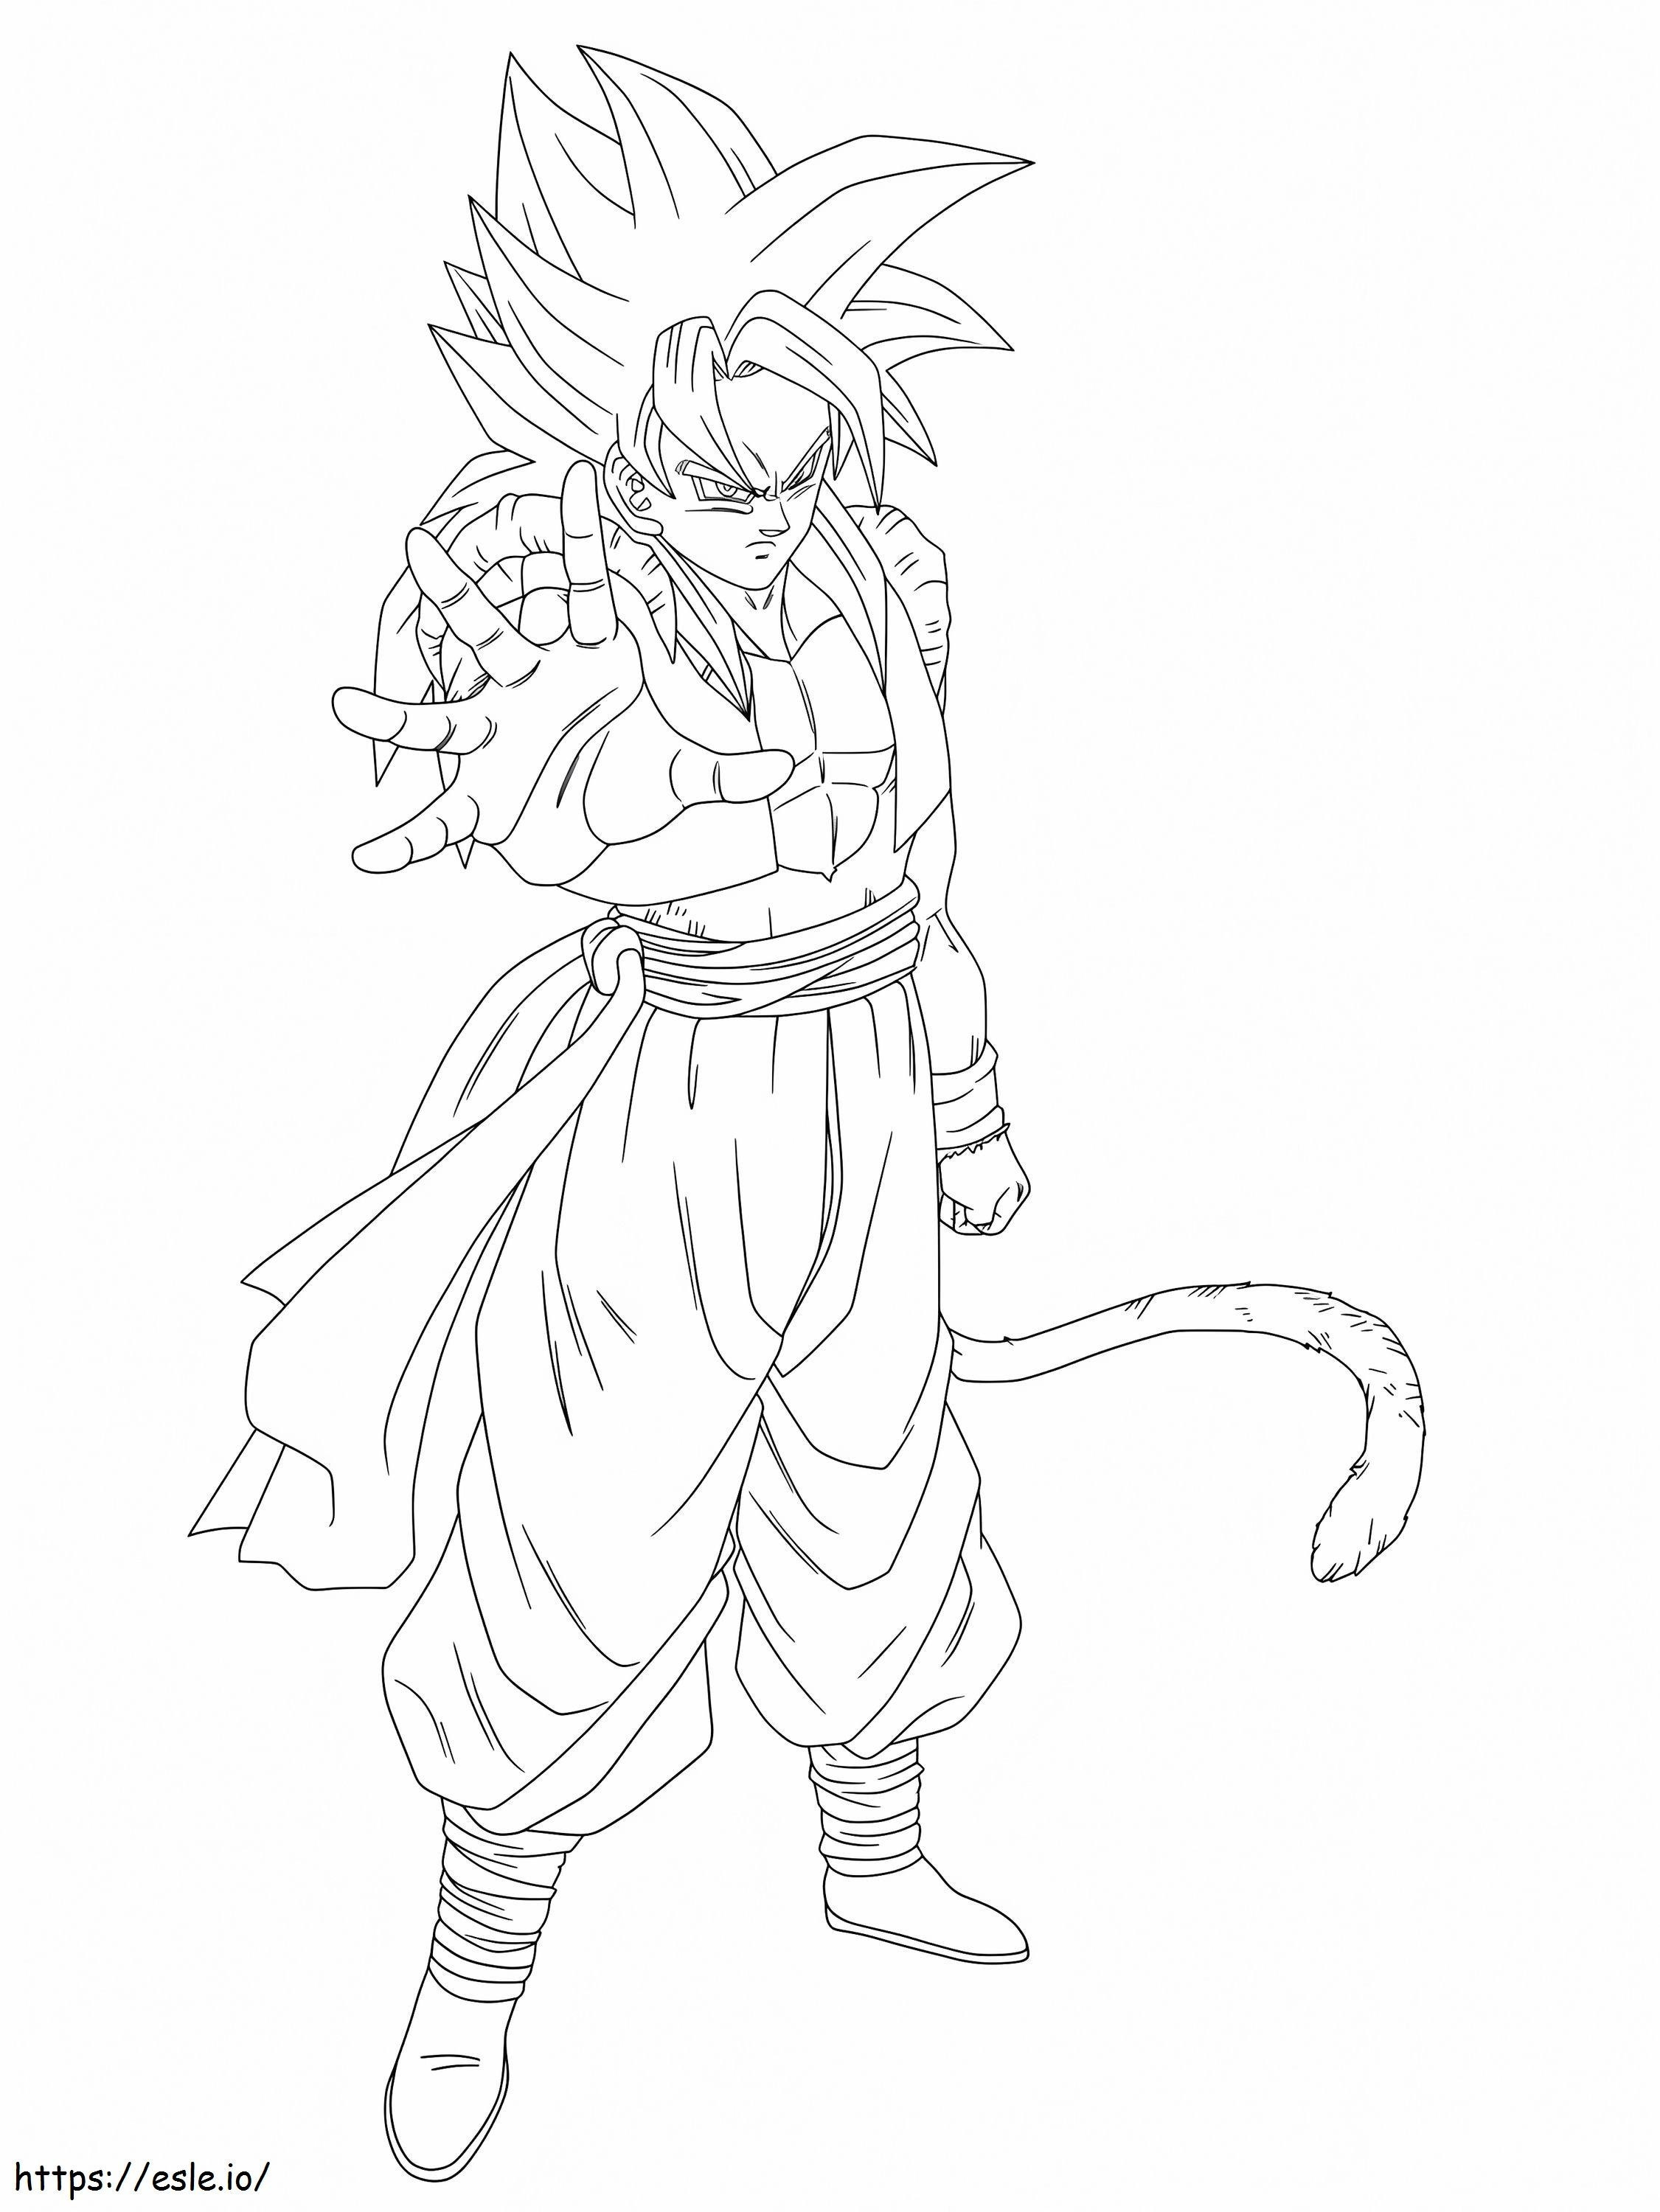 Kisspng Line Art White Cartoon Character Sketch Gogeta 5B312Cde81E6D3 1111843115299494065321 coloring page